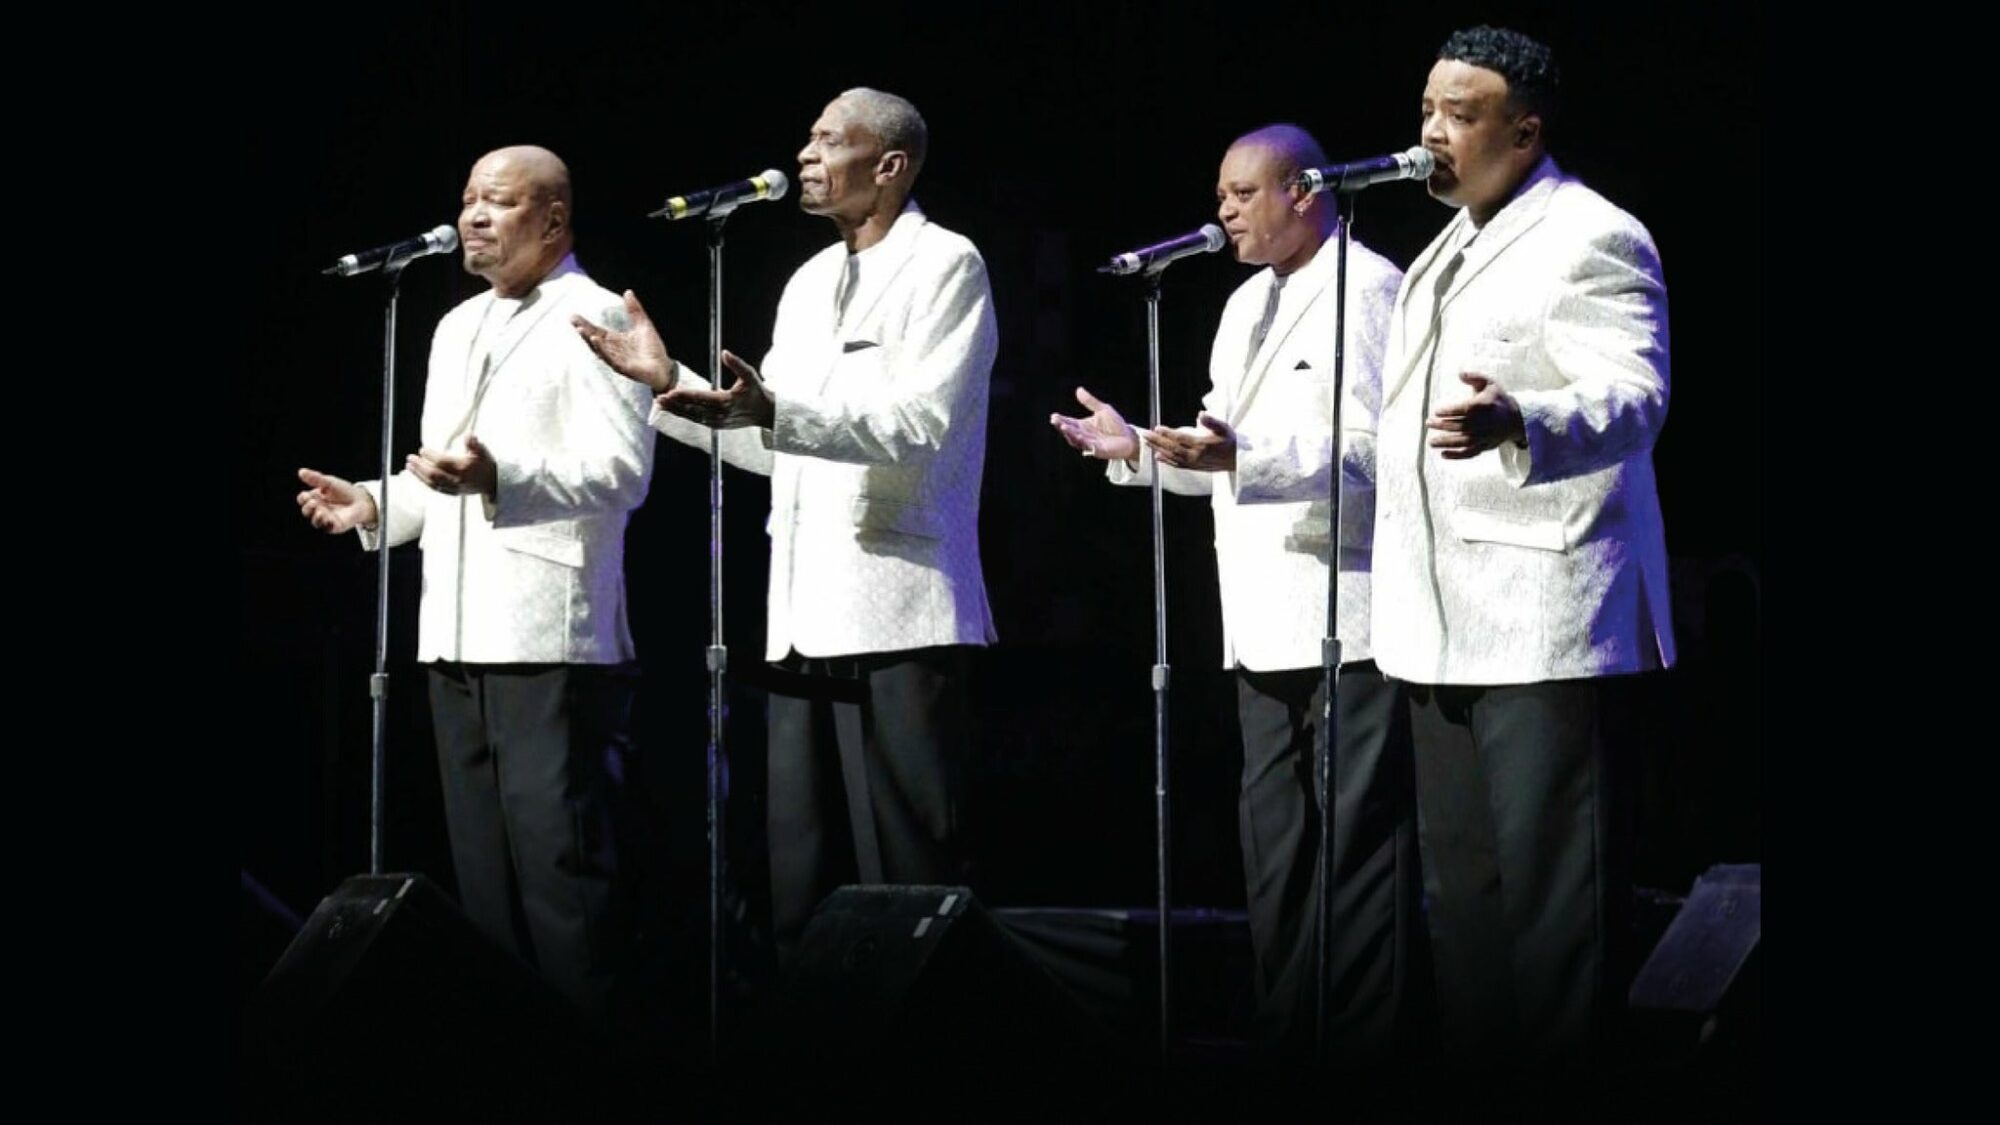 Image name The Stylistics at Sheffield City Hall Oval Hall Sheffield the 32 image from the post Events in Yorkshire.com.